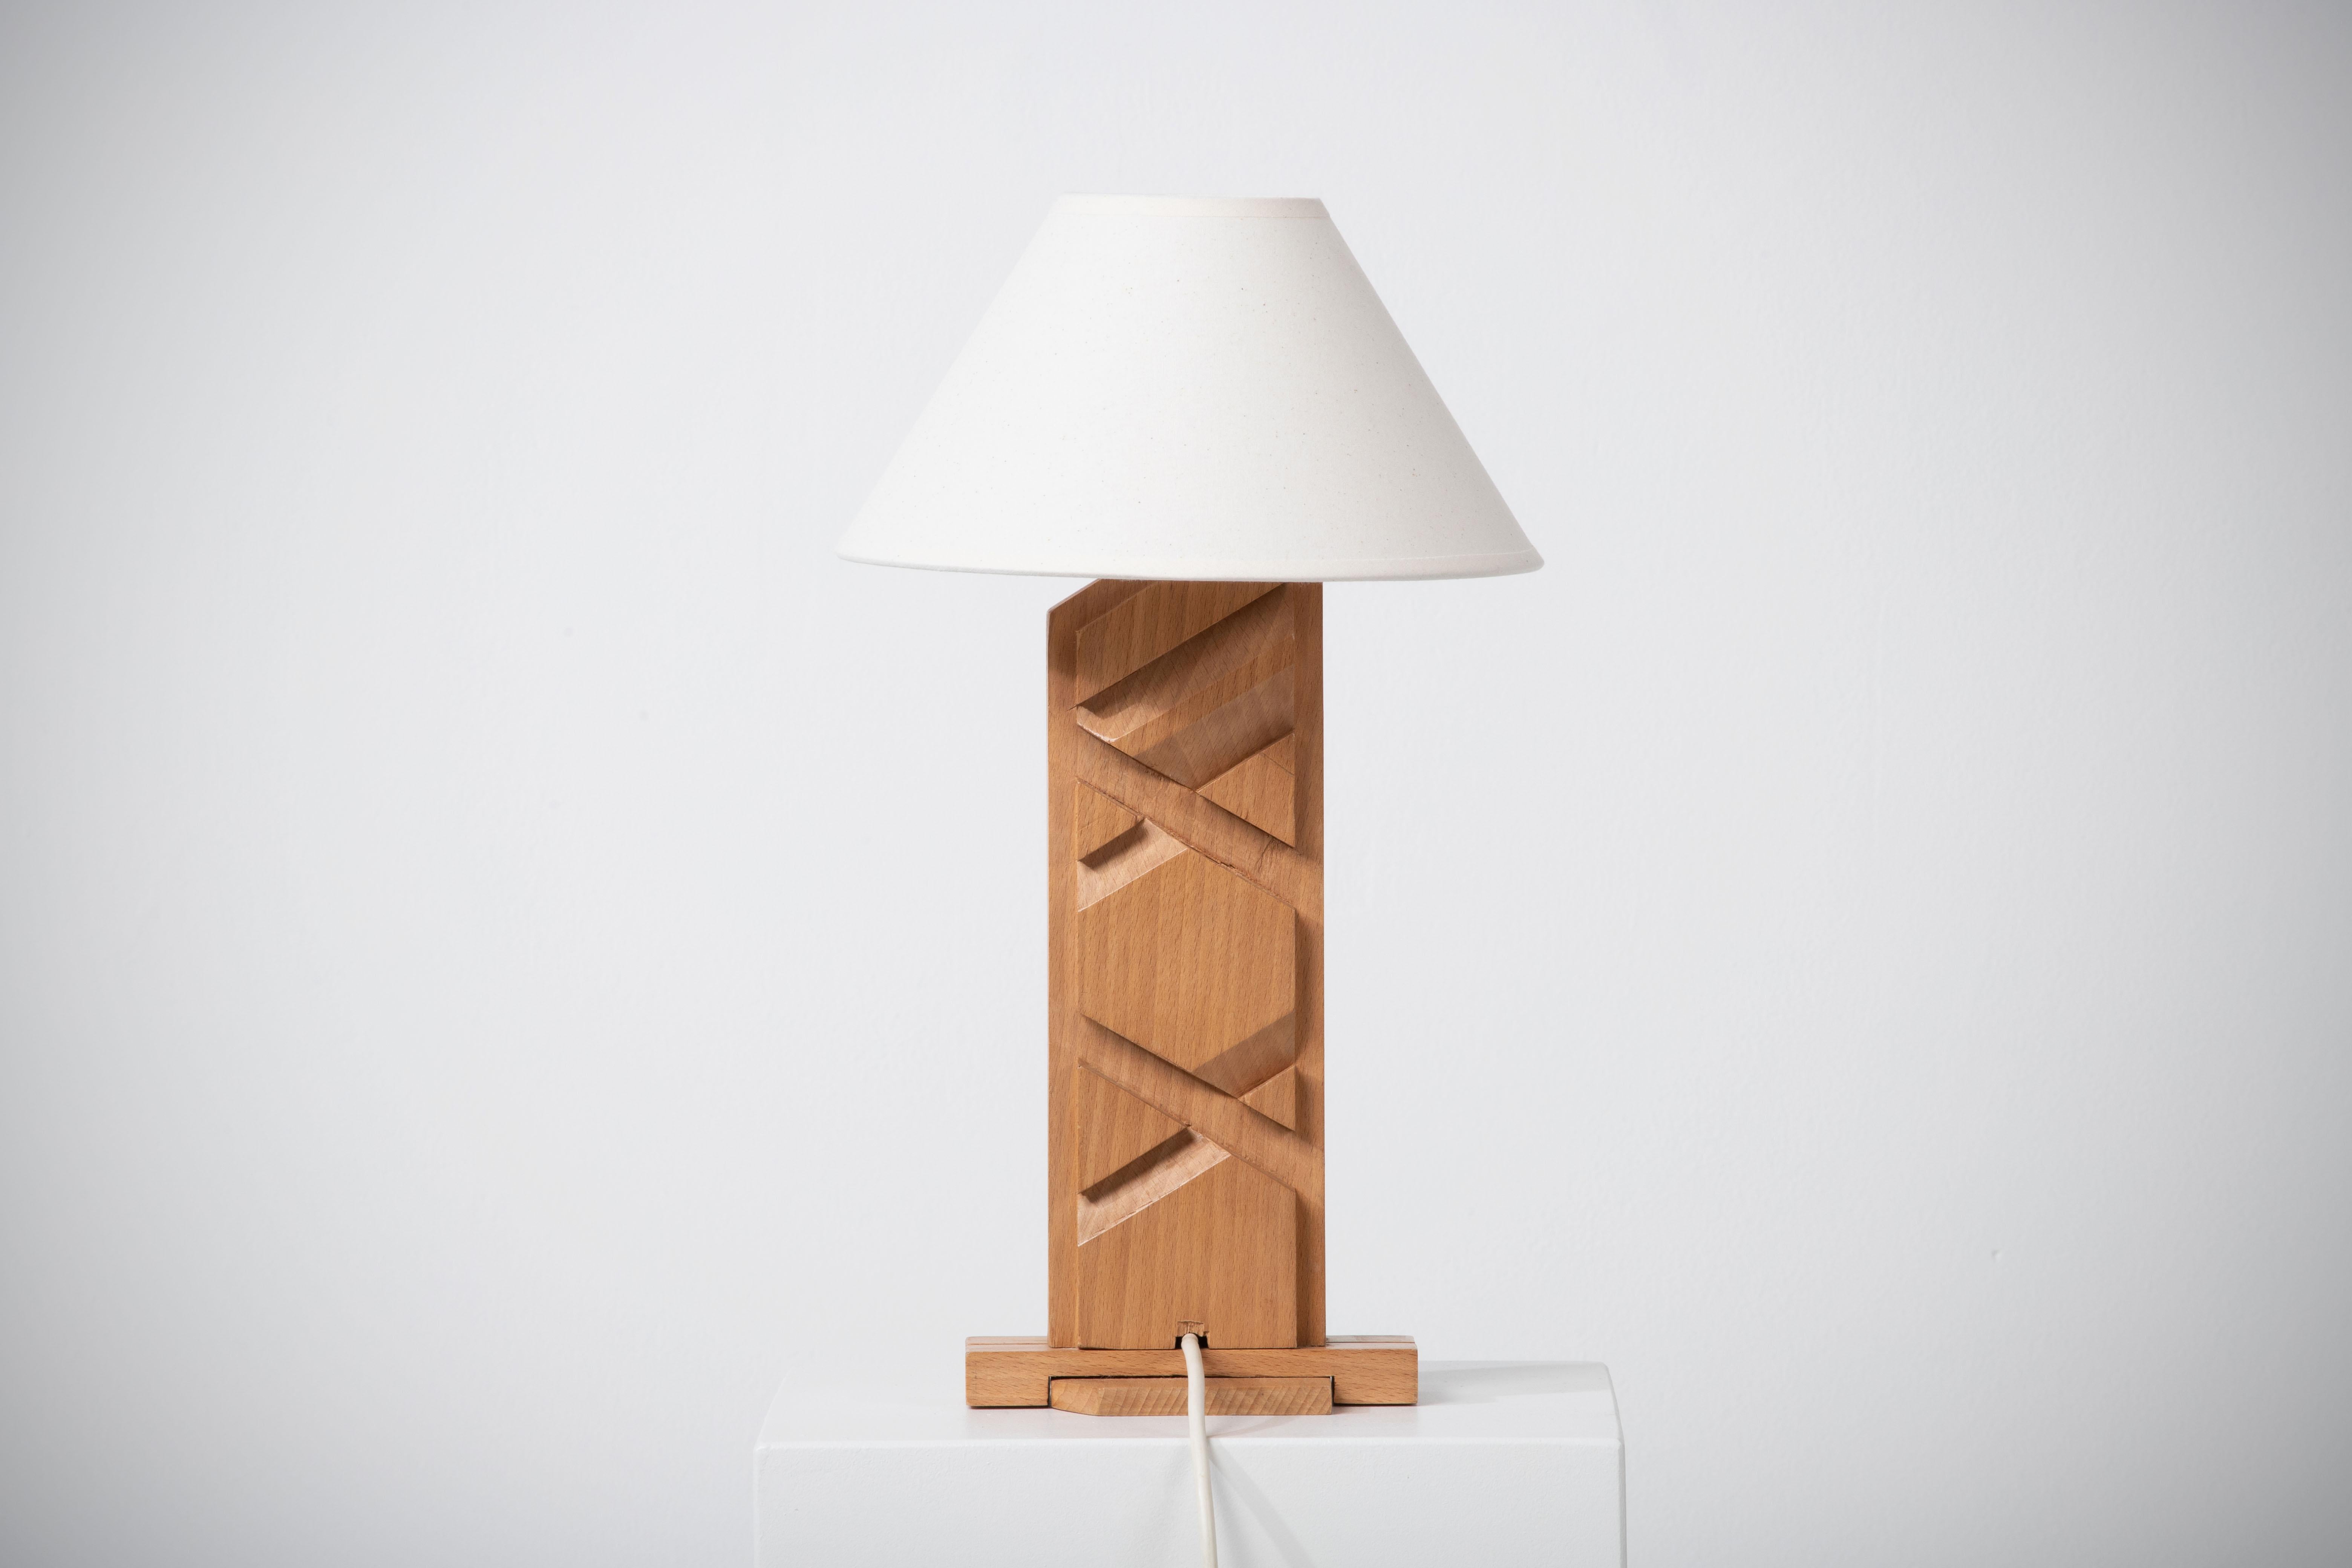 Introducing an exquisite hand carved midcentury French lamp that effortlessly captures the essence of timeless beauty and craftsmanship. Crafted with meticulous attention to detail, this lamp showcases elegant straight lines and is made from